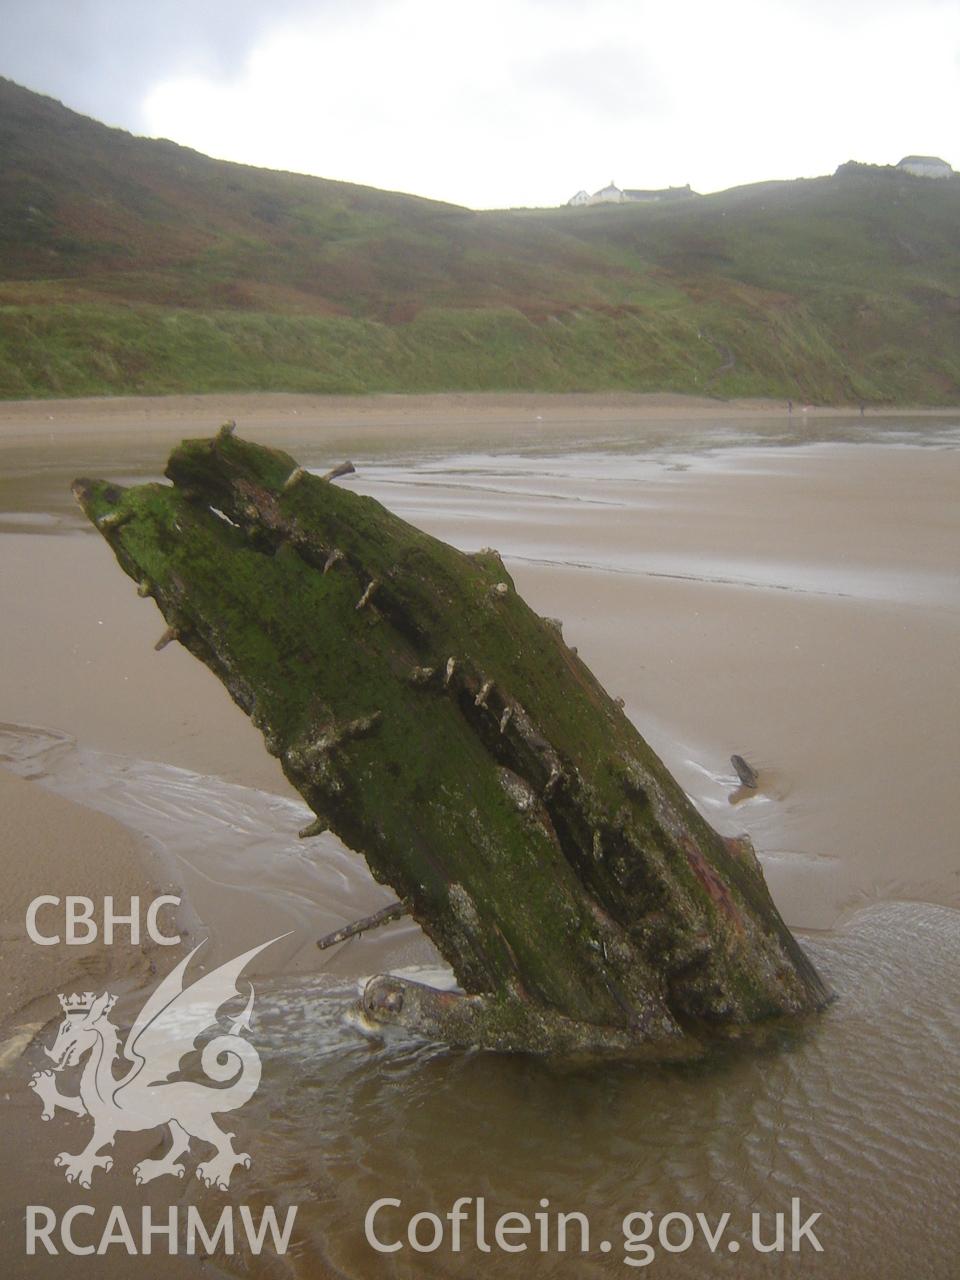 Digital photograph showing the remains of the Helvetia, produced by Ian Cundy, October 2012.